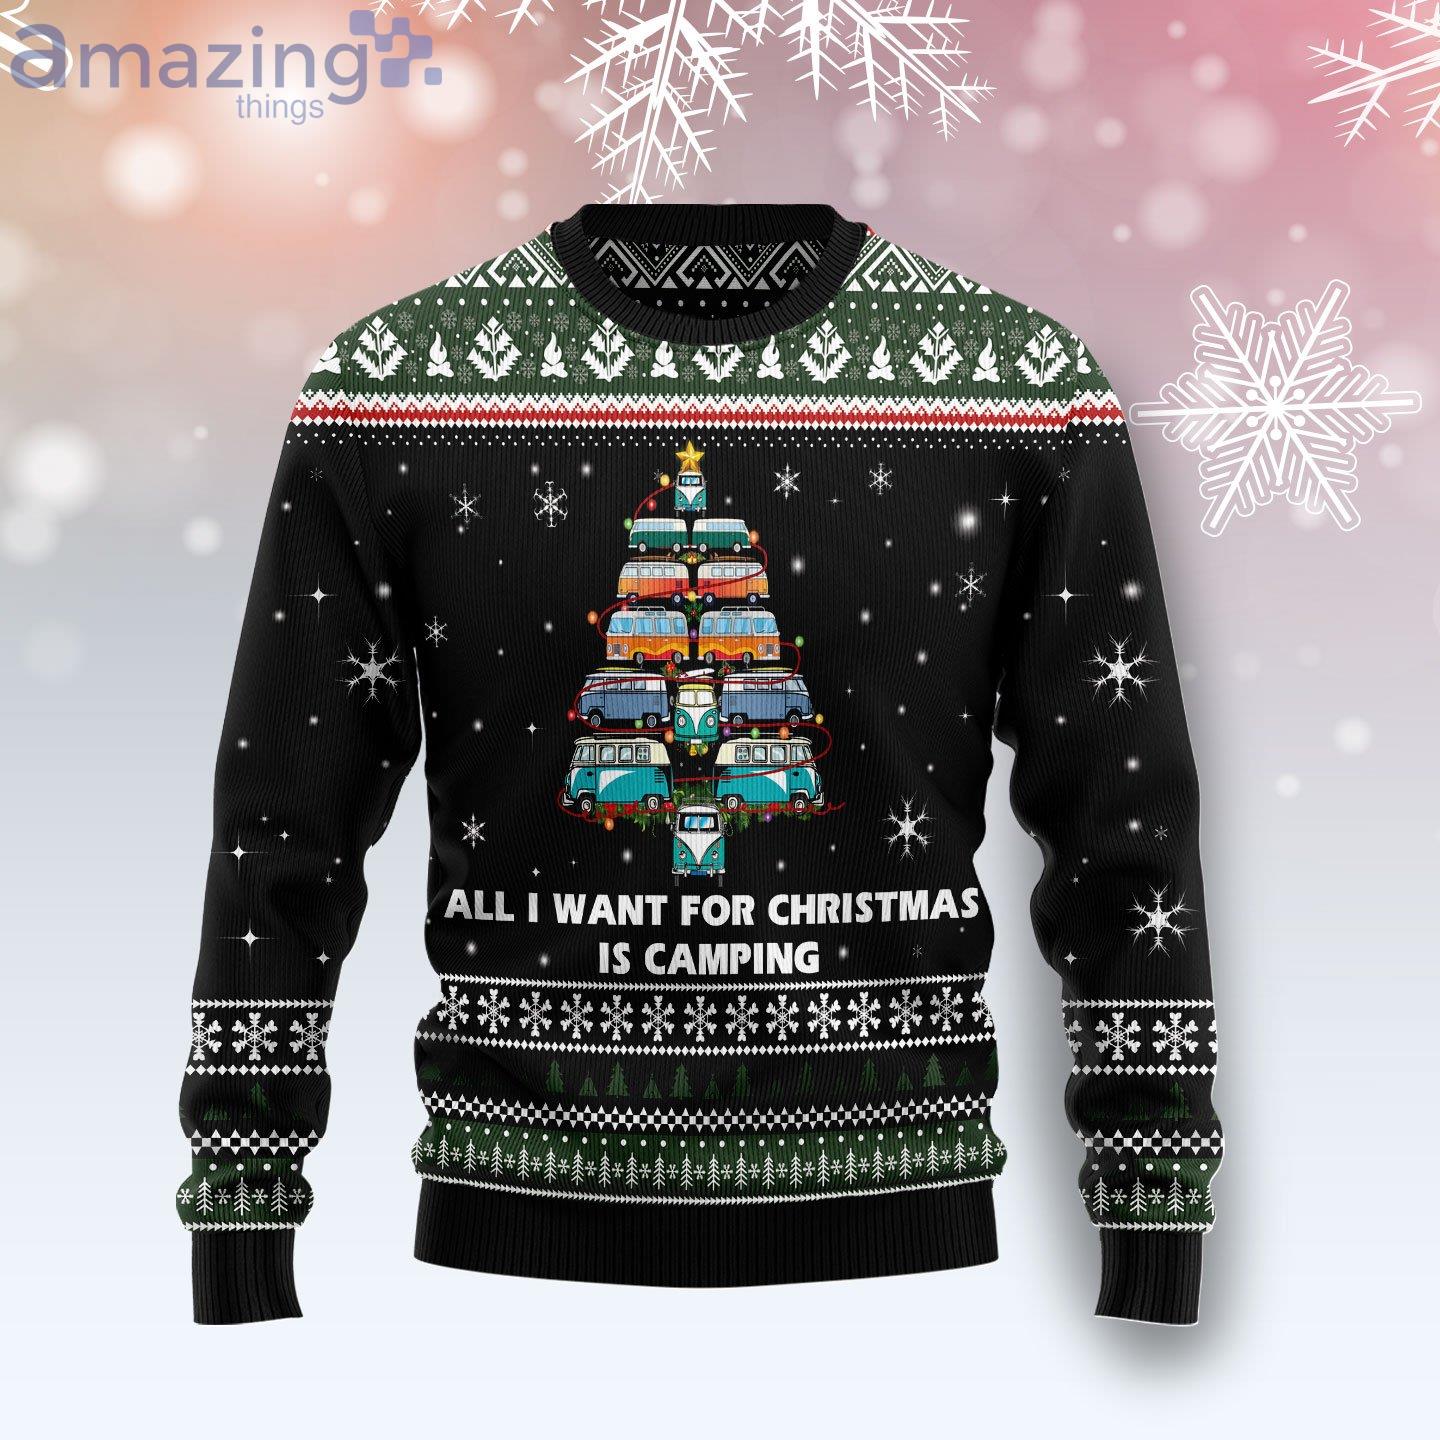 All I Want For Christmas Is Camping Ugly Christmas Sweater Product Photo 1